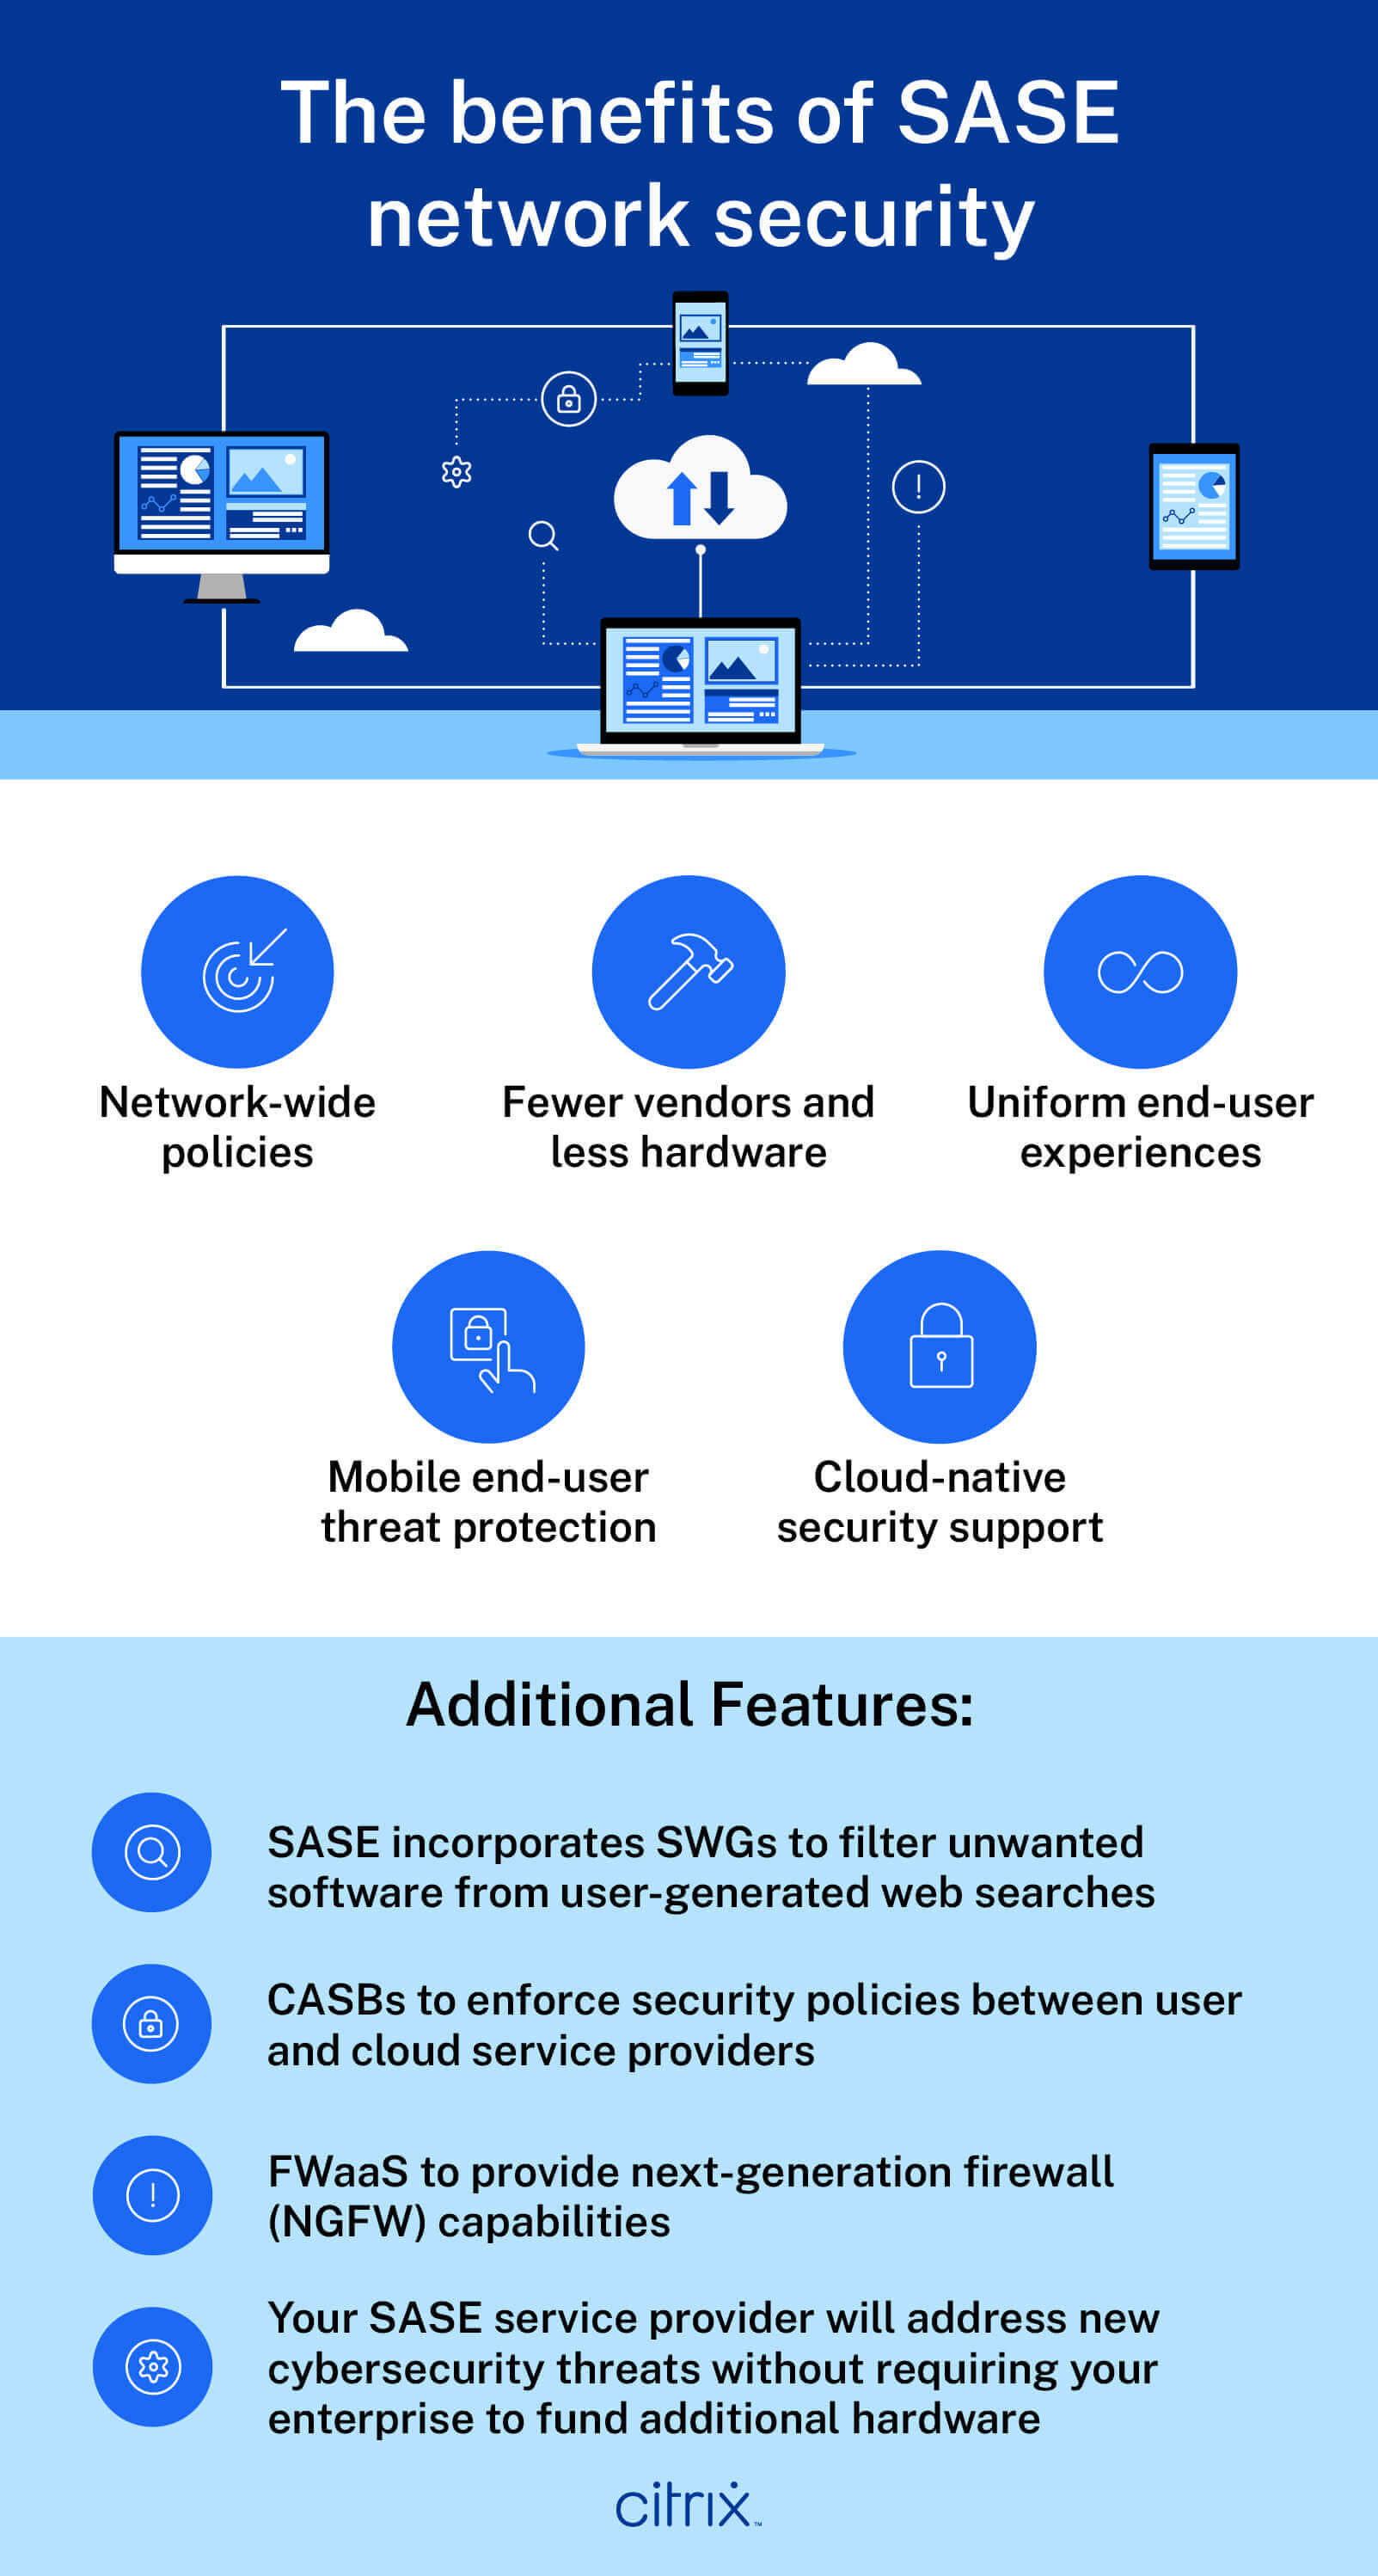 The benefits of SASE network security